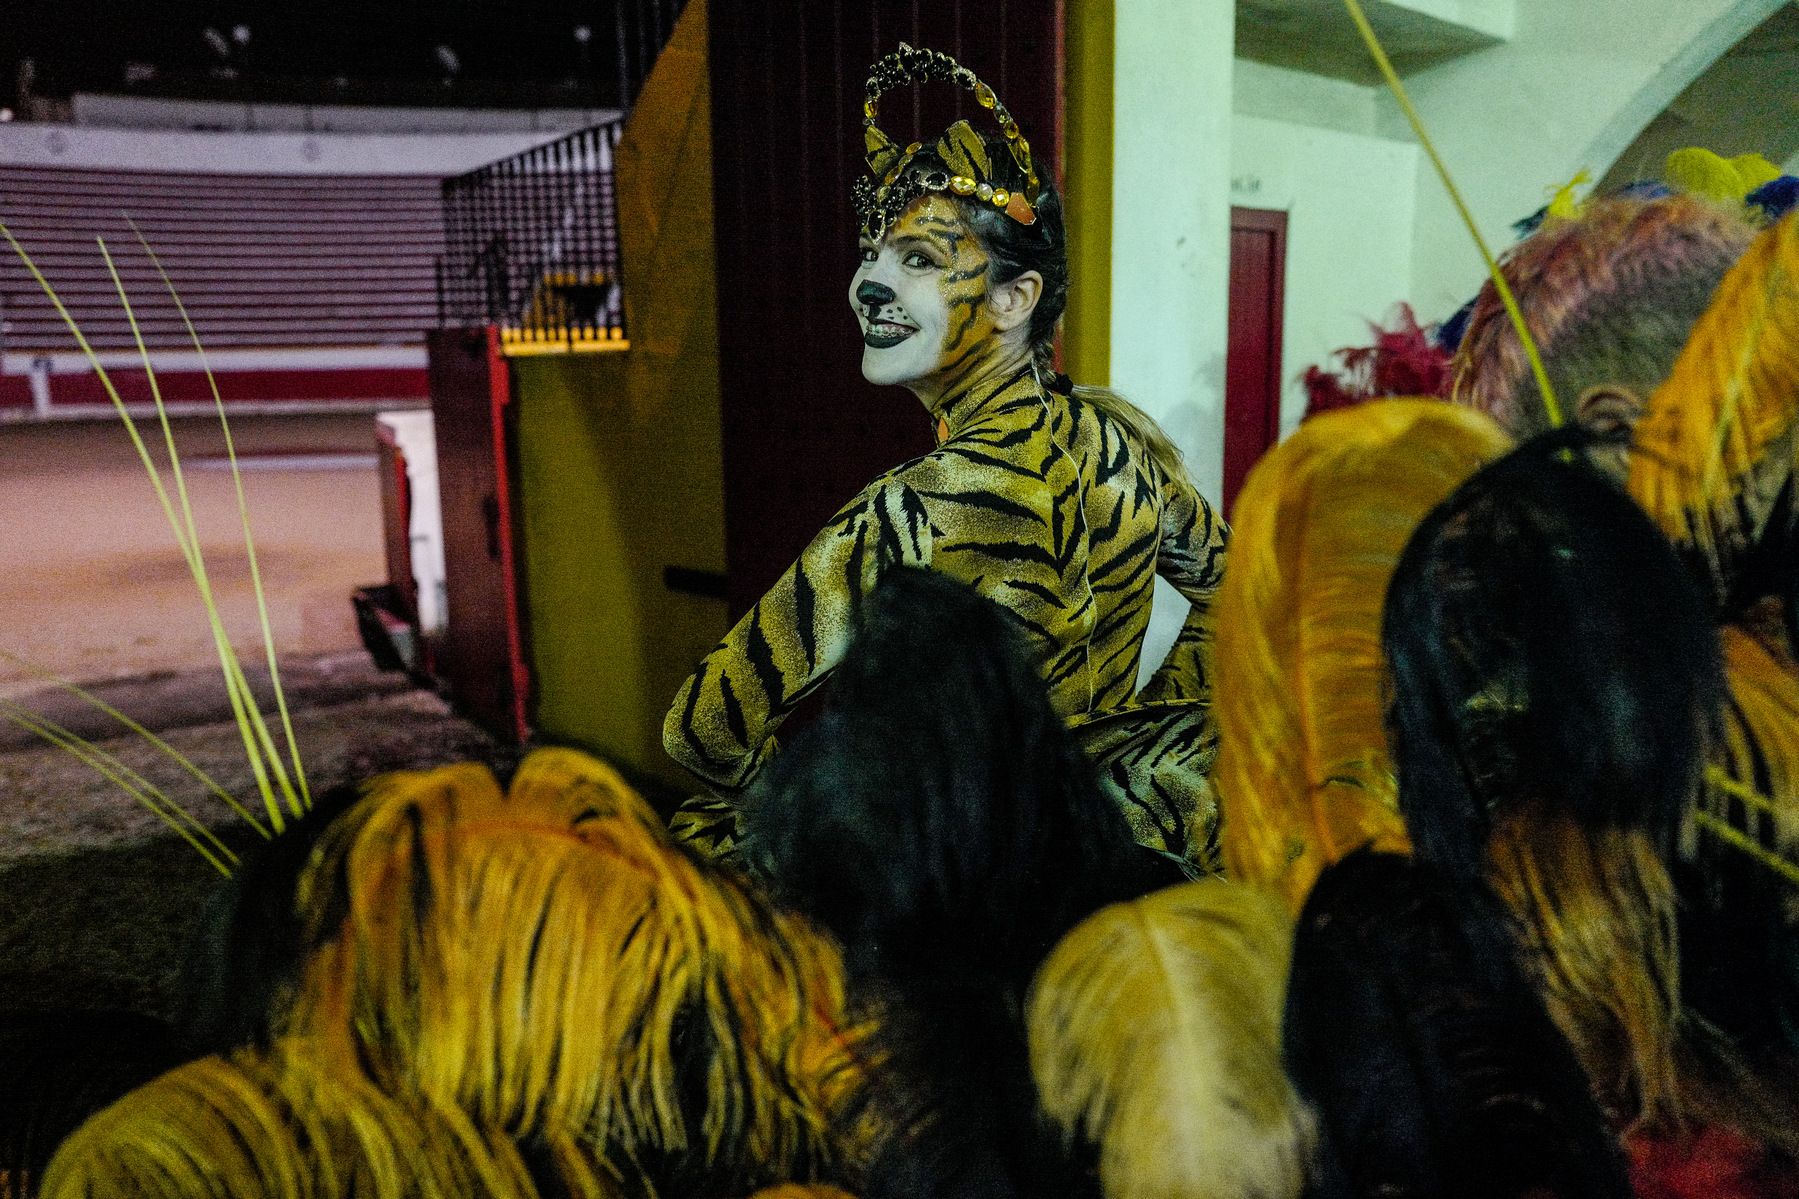 A person with tiger-inspired makeup and costume.